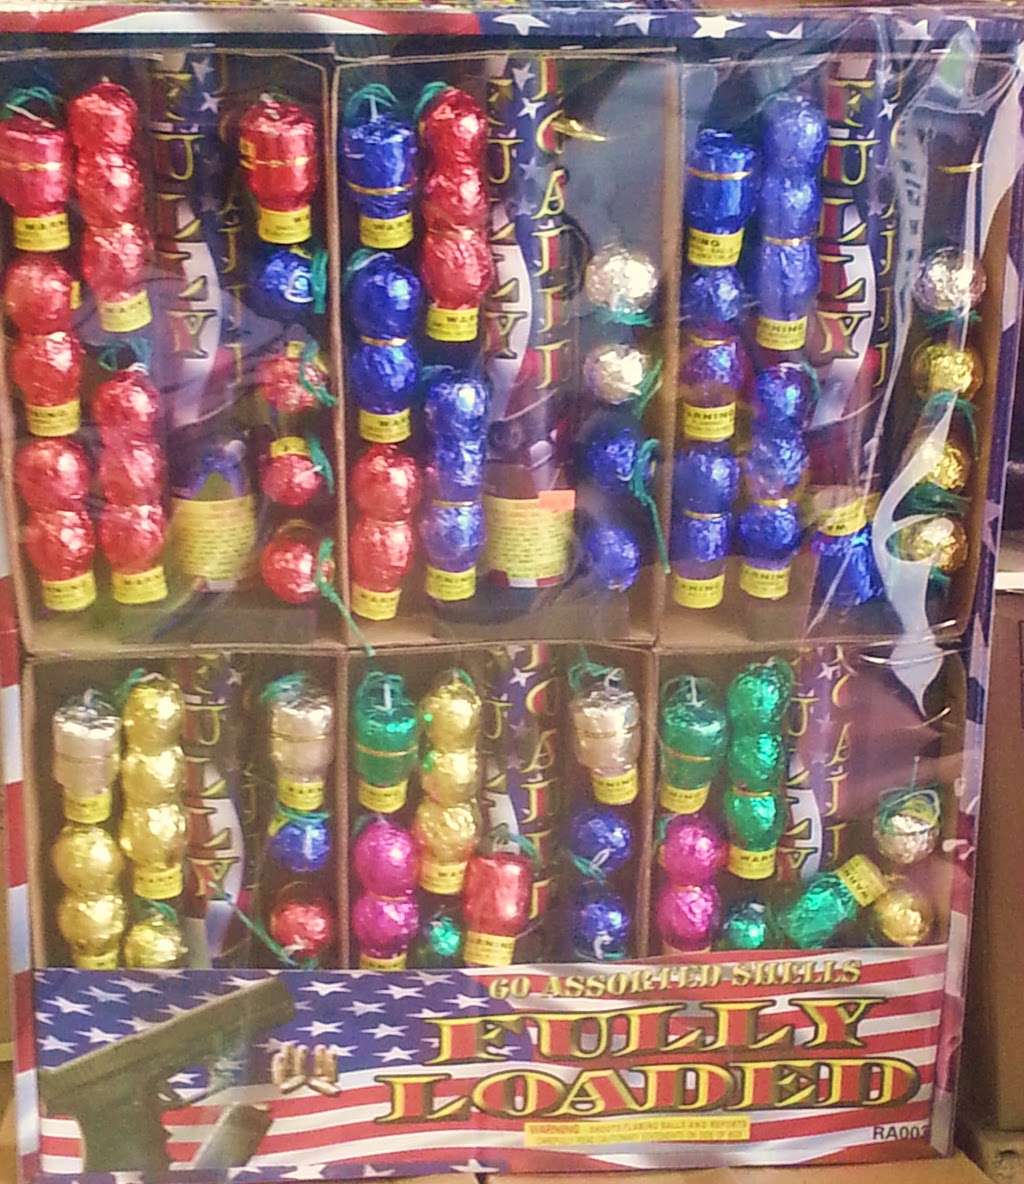 X-Treme Pyro Fireworks | 2607 W Lincoln Hwy, Merrillville, IN 46410 | Phone: (219) 525-5111